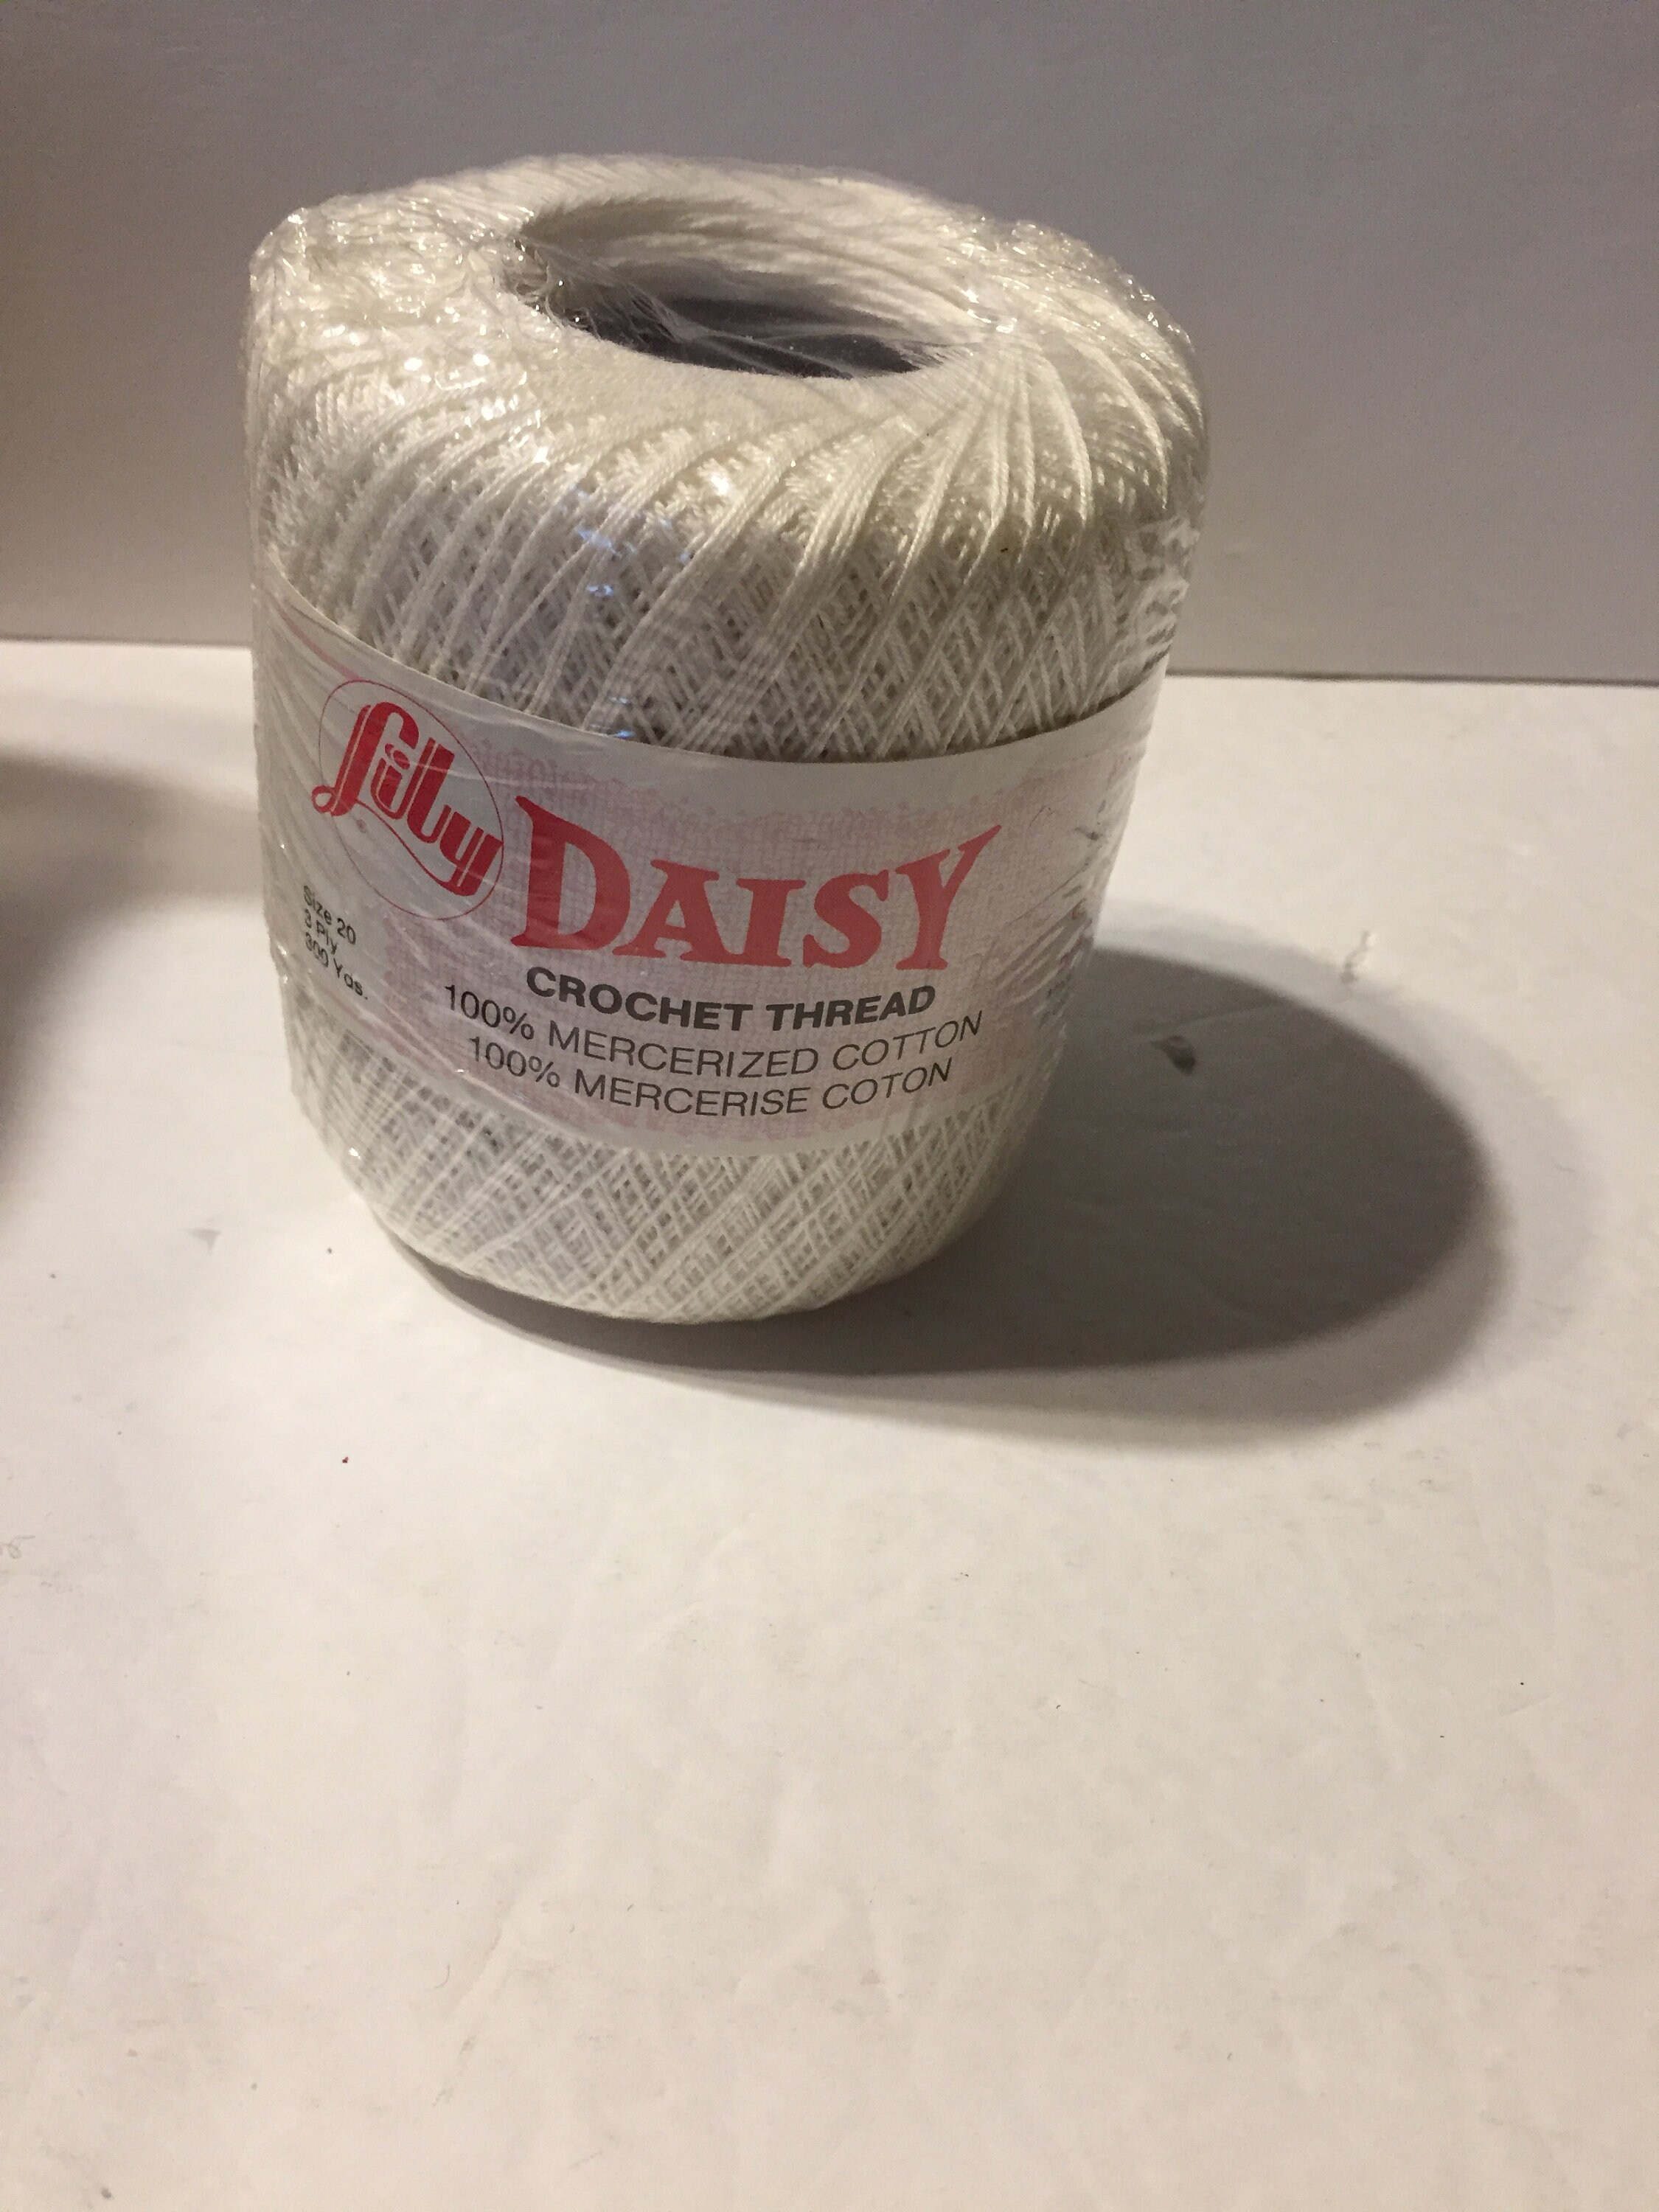 Aunt Lydia Size 10 Classic Crochet Thread 57 Colors Available 